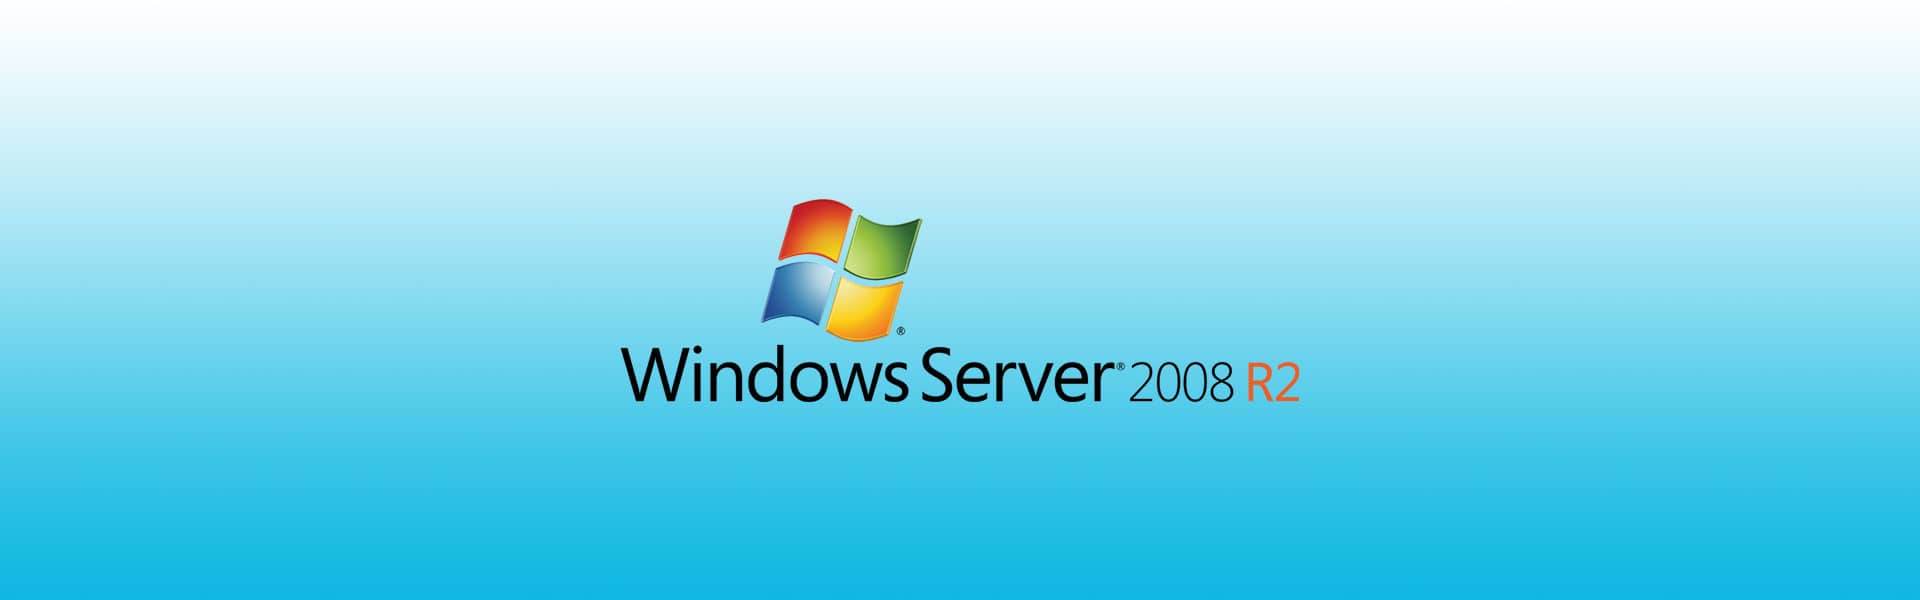 End of support for Windows Server 2008 R2